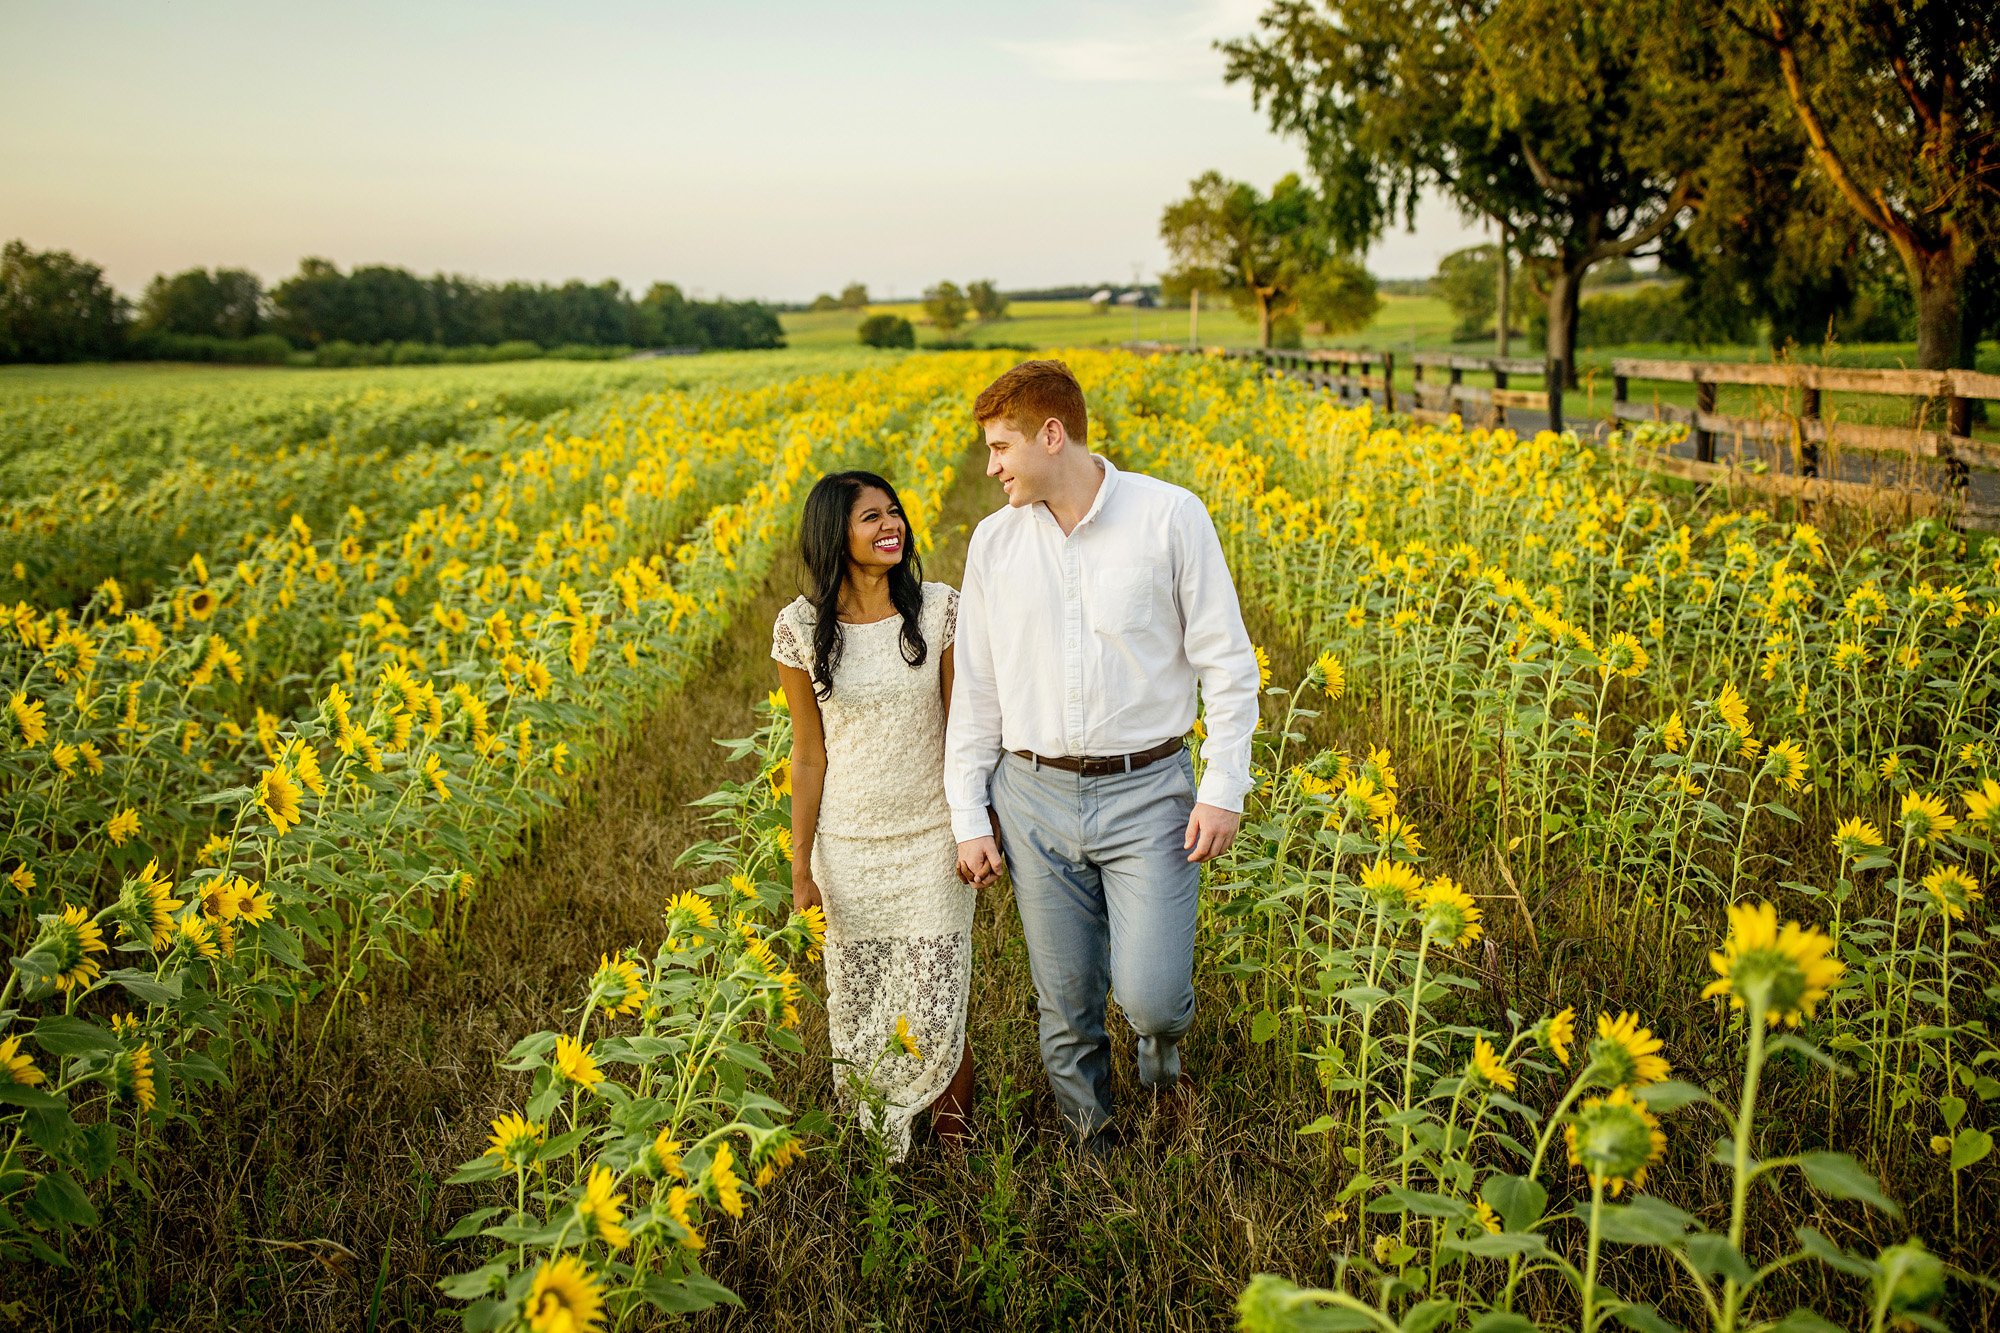 Seriously_Sabrina_Photography_Lexington_Midway_Kentucky_Engagement_Merefield_Sunflowers_Naz_and_Drew1.jpg